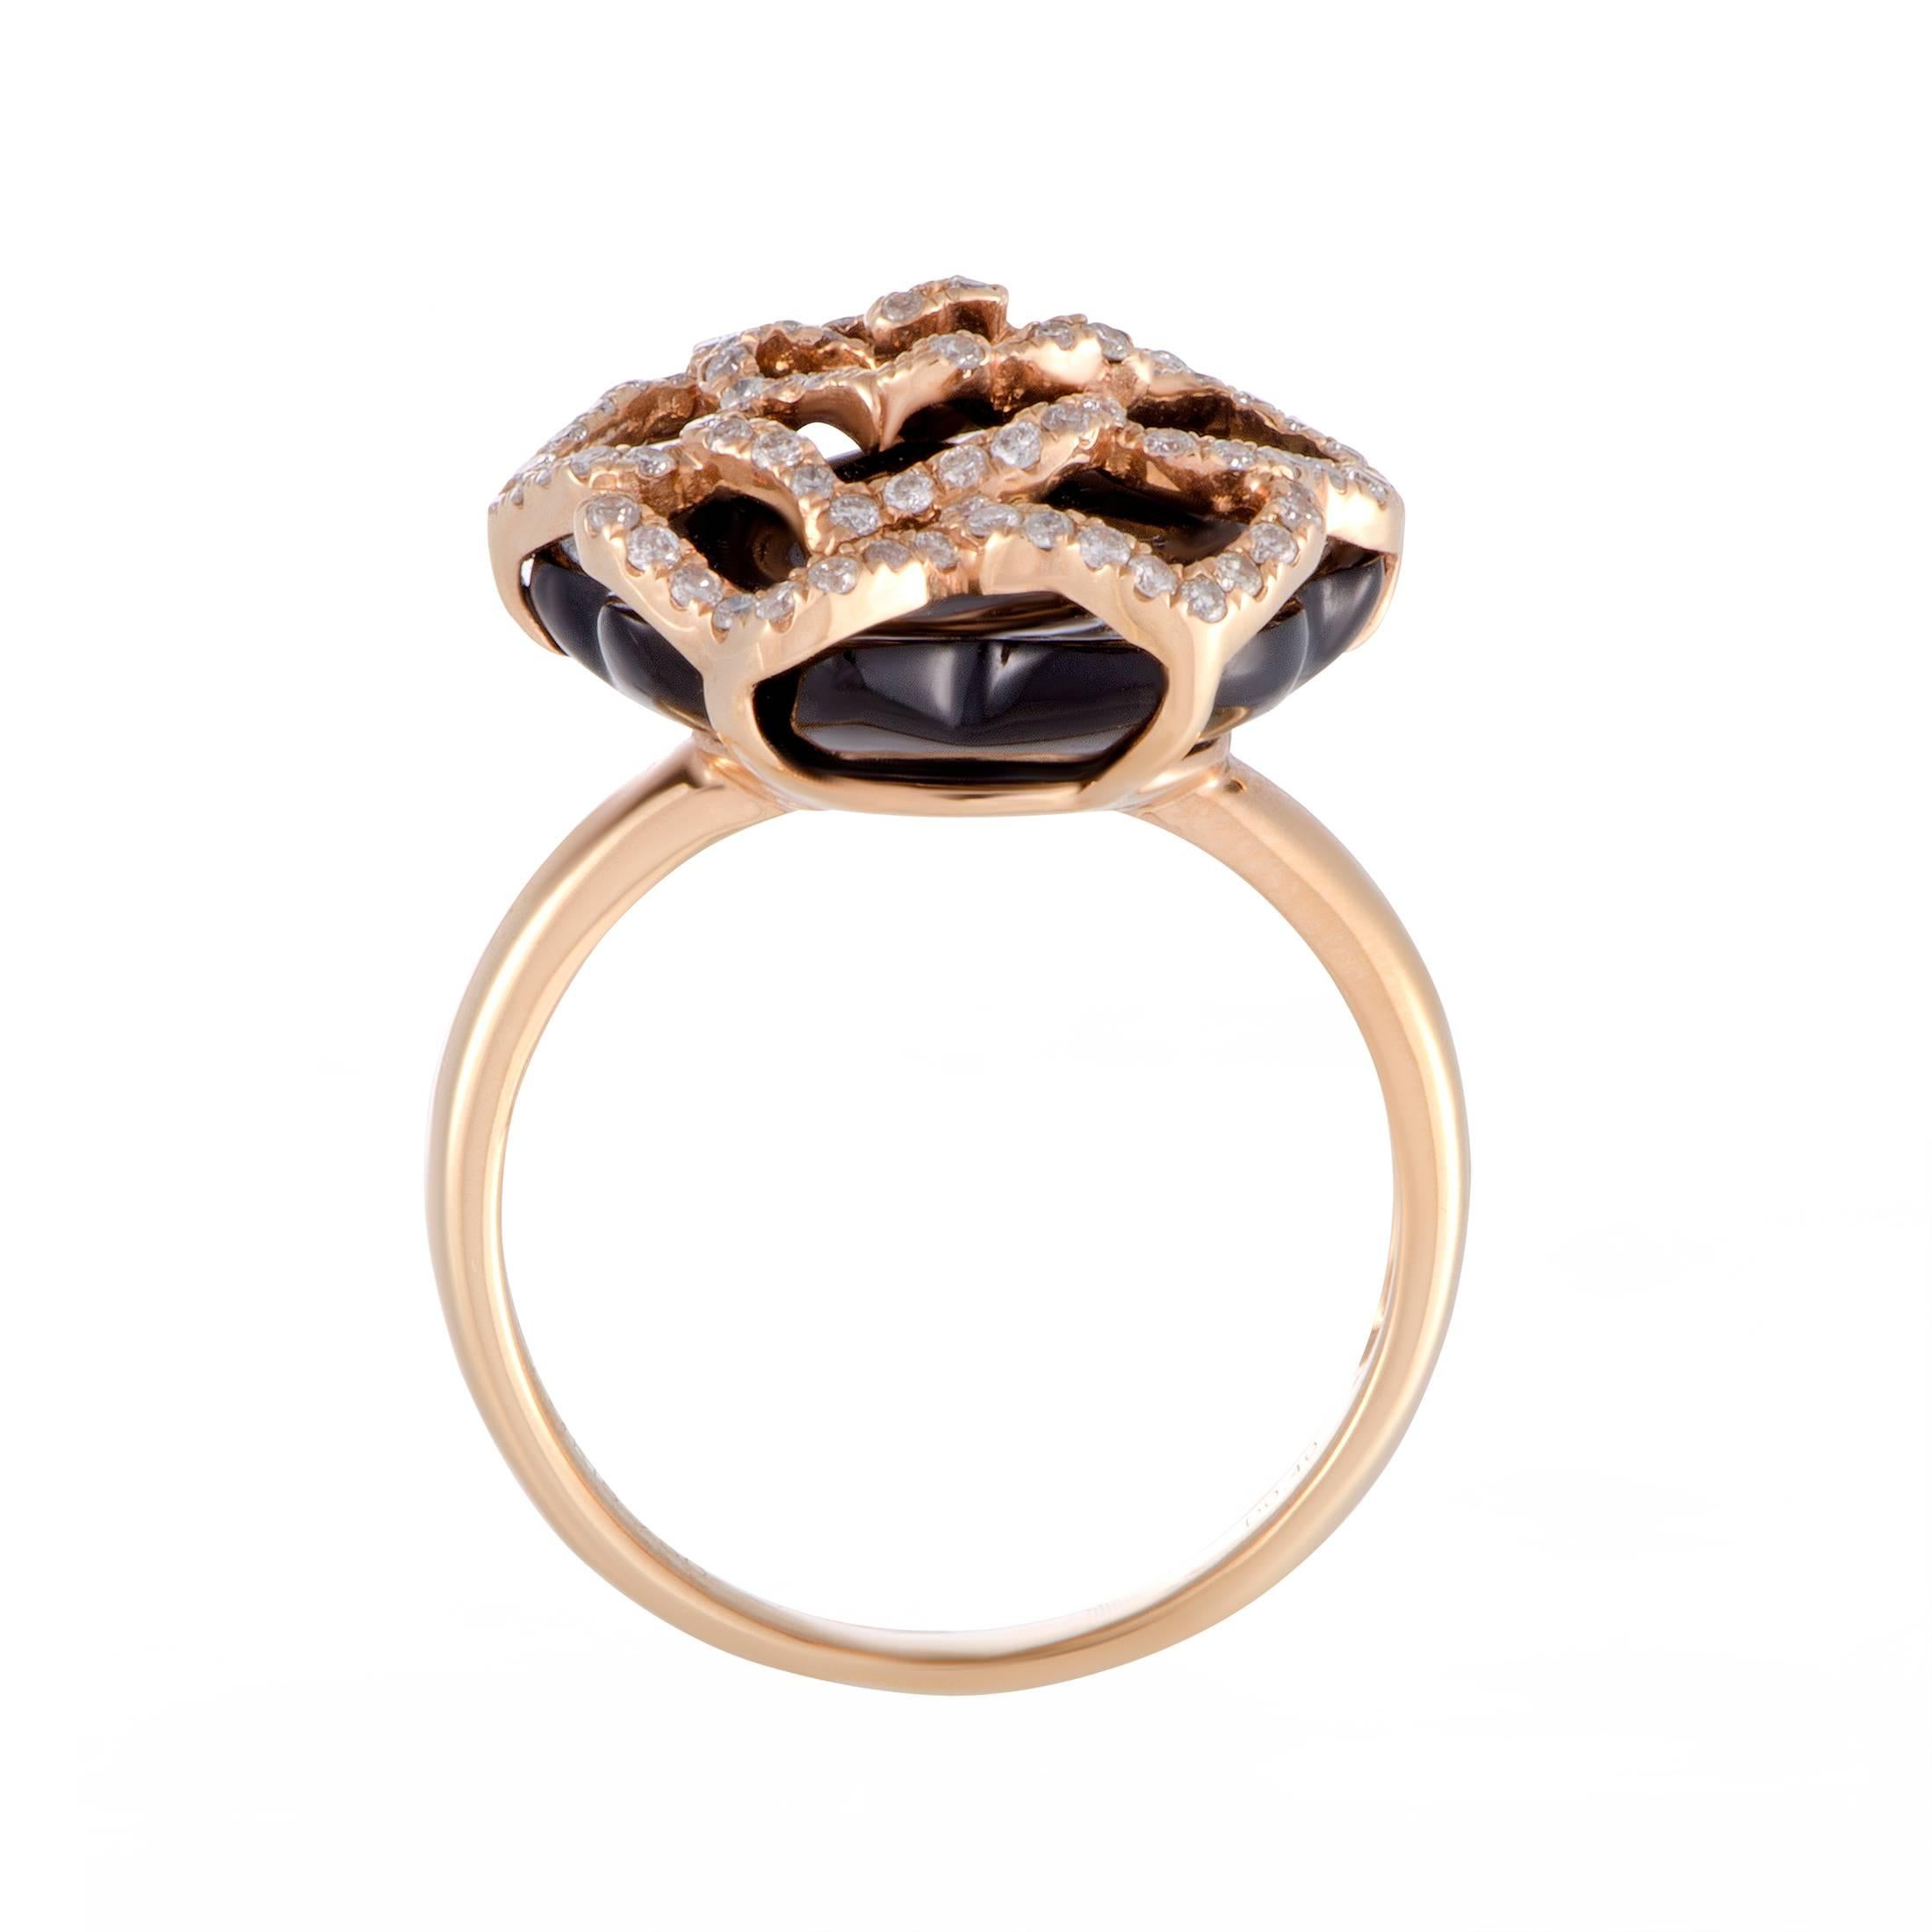 The endearingly feminine motif of a black onyx rose is marvelously presented in 18K rose gold in this sublime ring. Lastly, .40ct of diamonds give this divine piece of jewelry an exceptionally graceful appearance.
Ring Size: 6.75
Ring Top